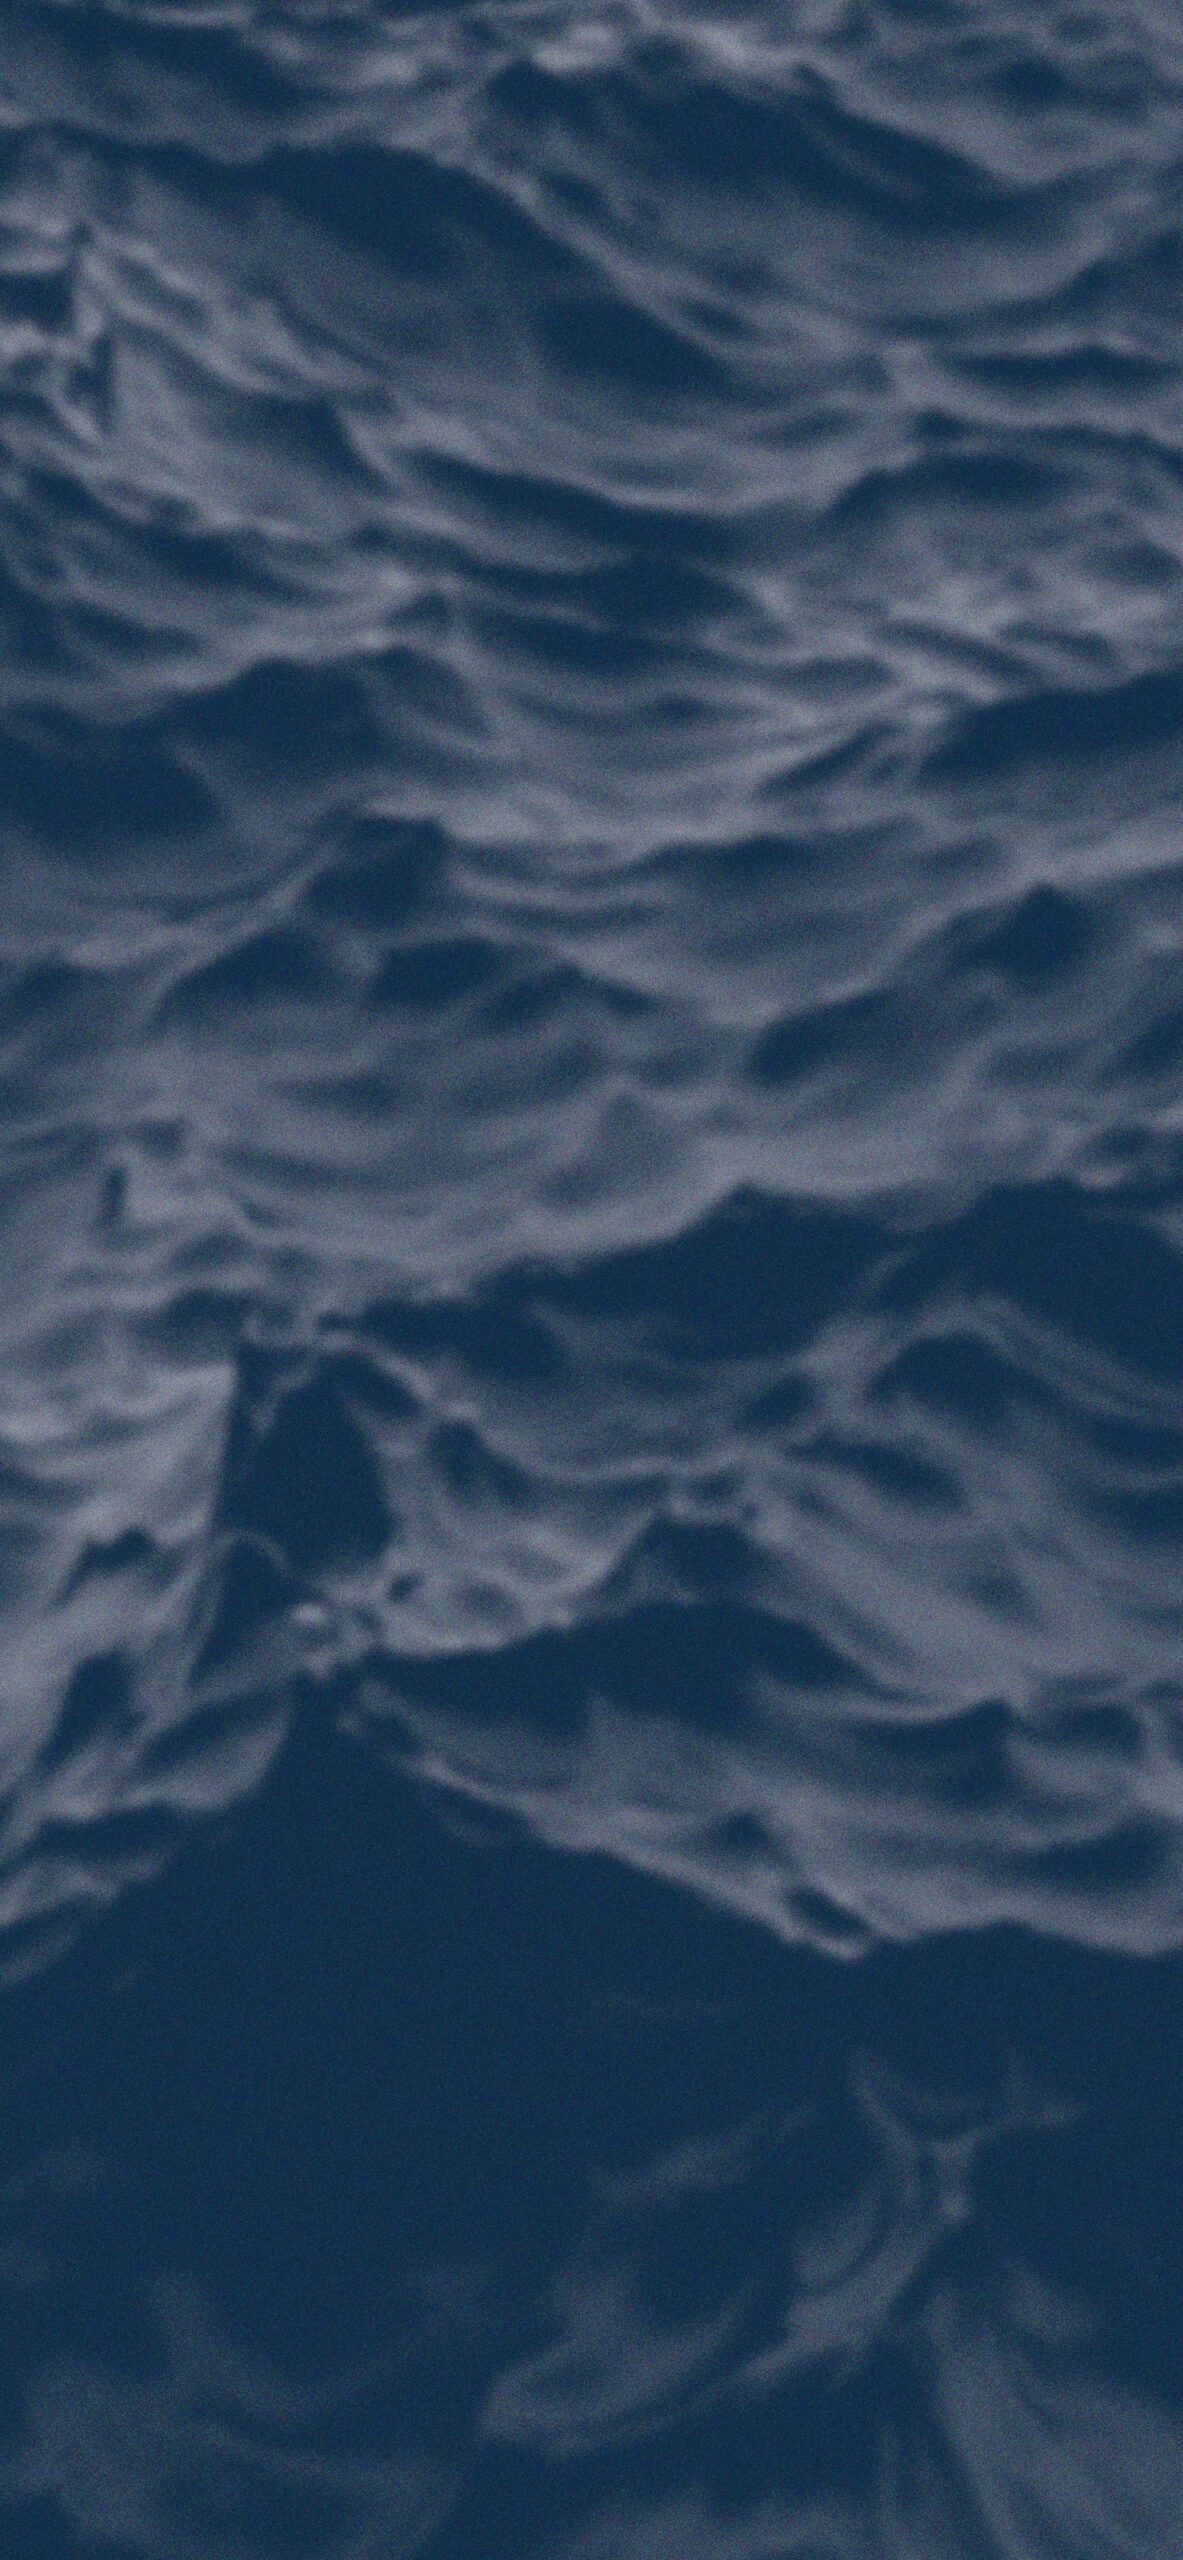 A picture of the ocean with waves - Dark blue, ocean, wave